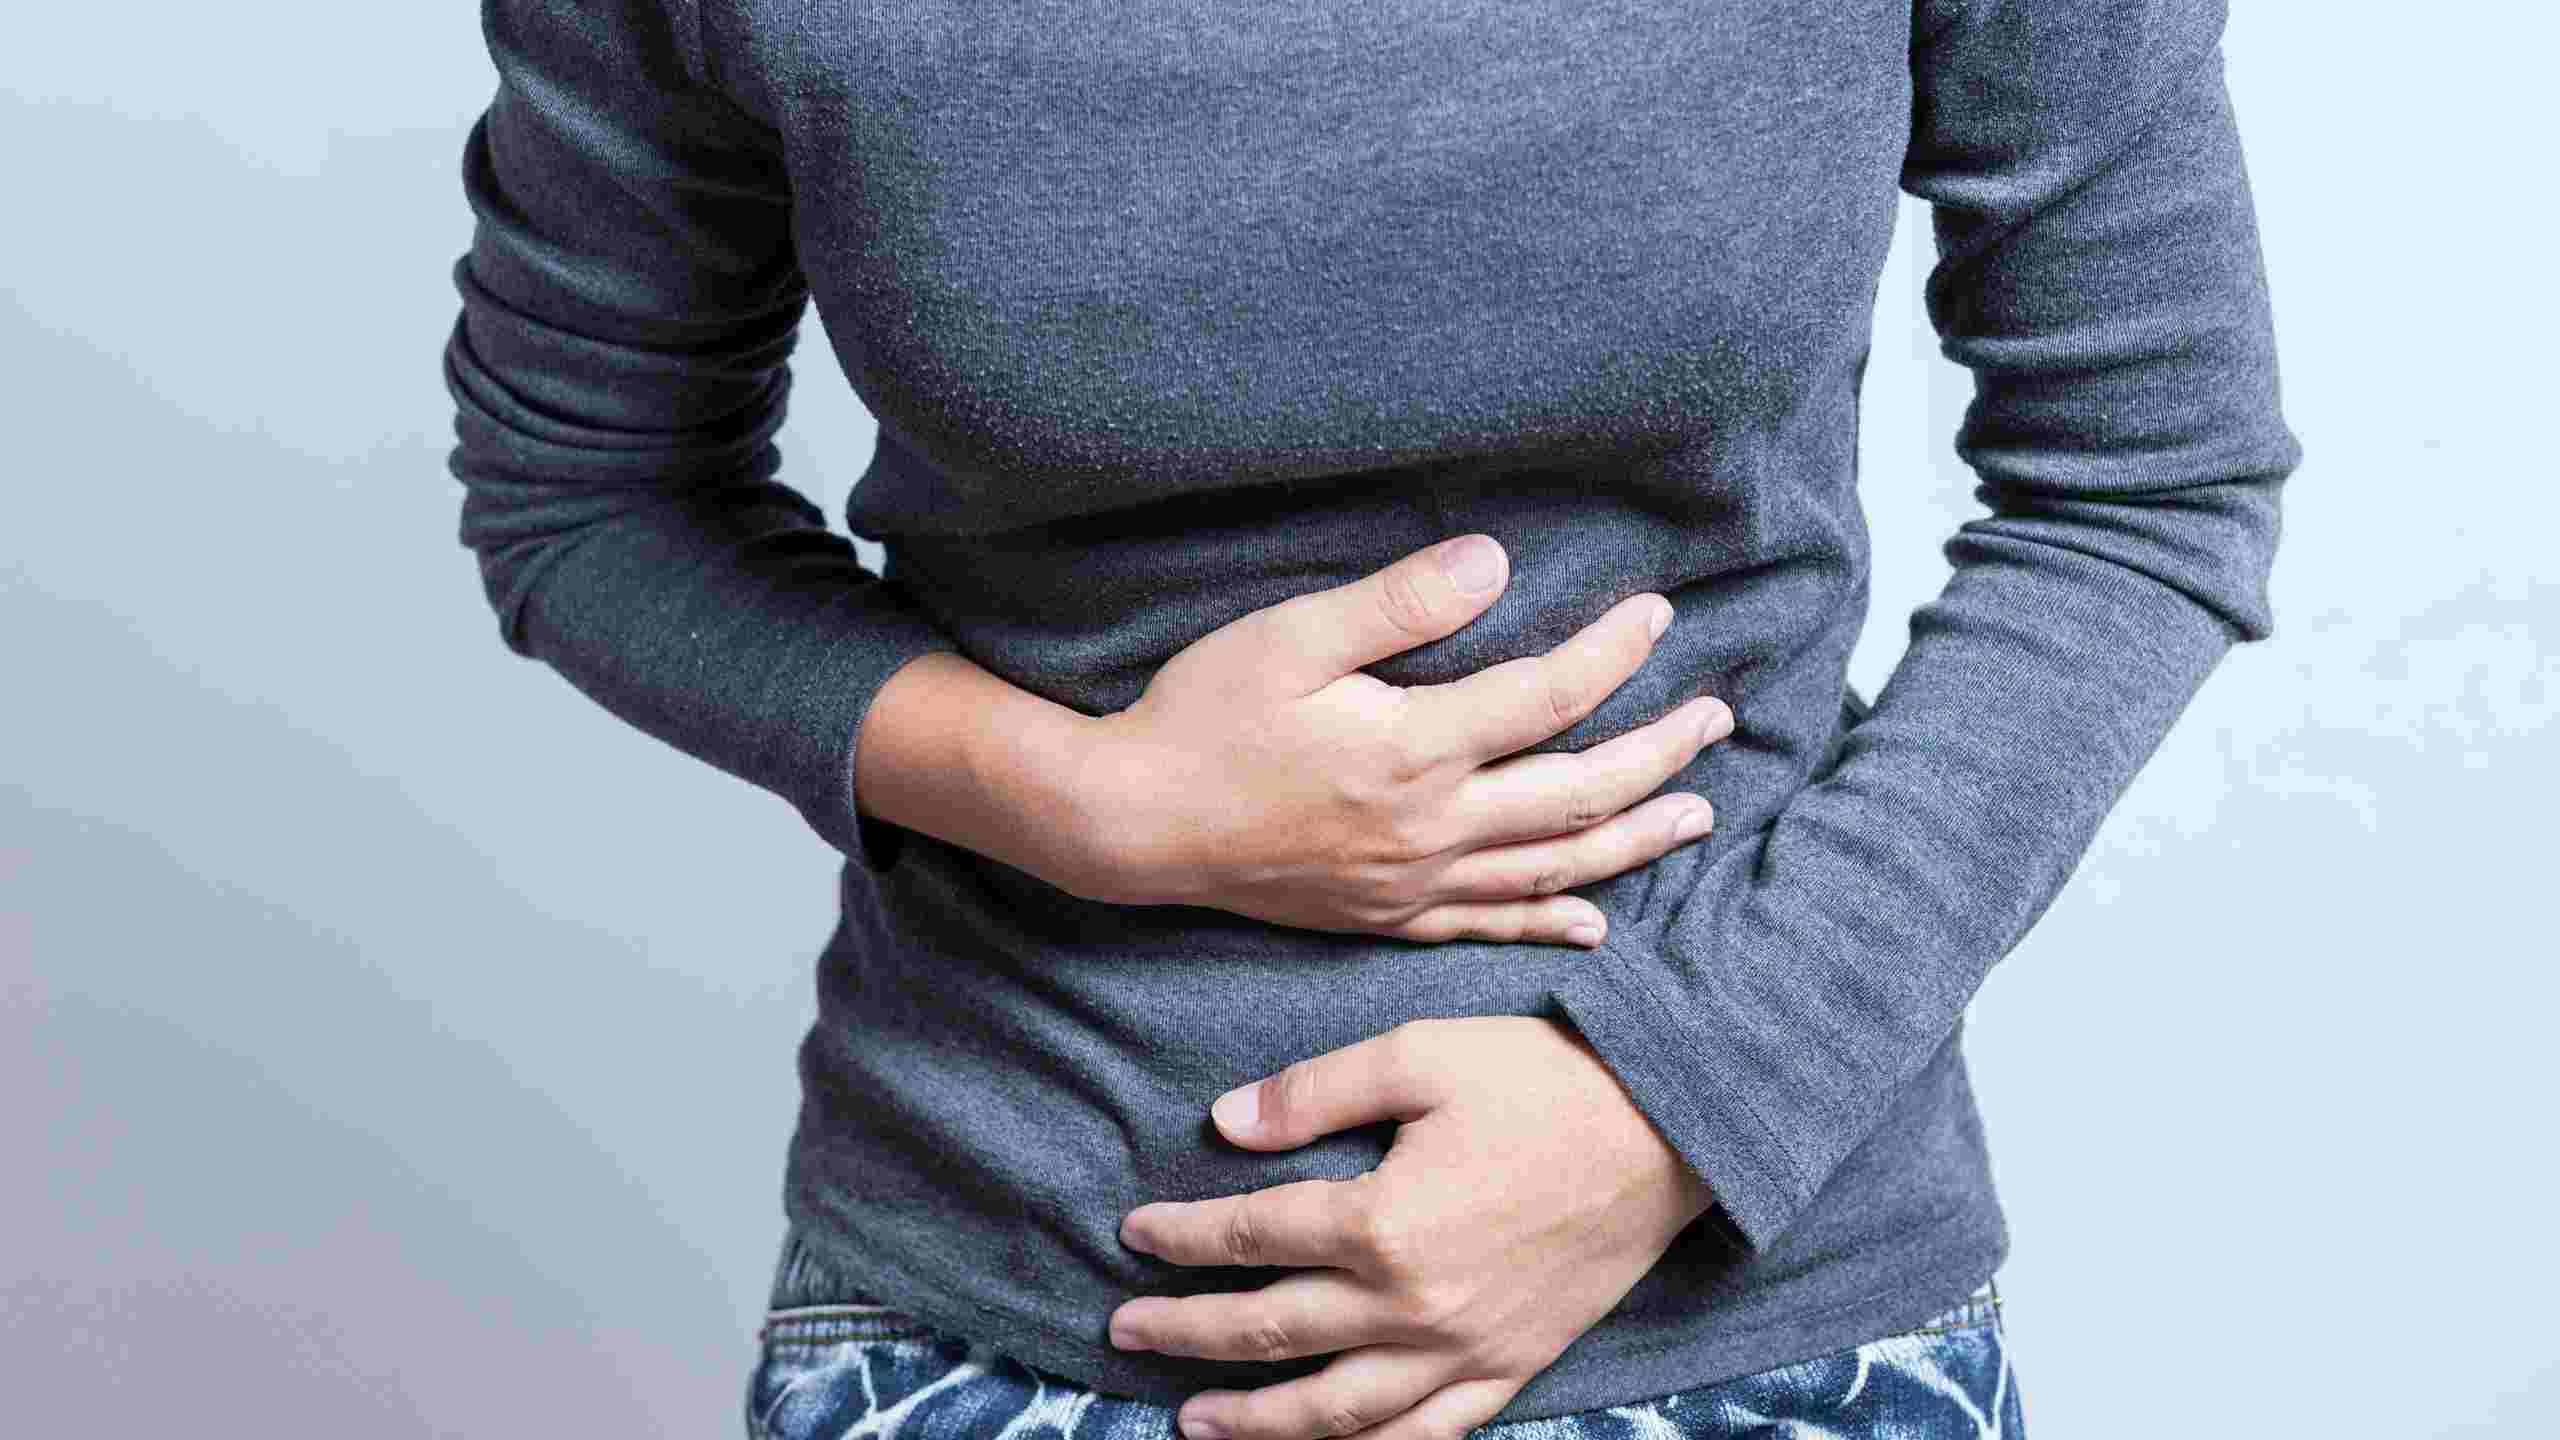 What causes constipation?